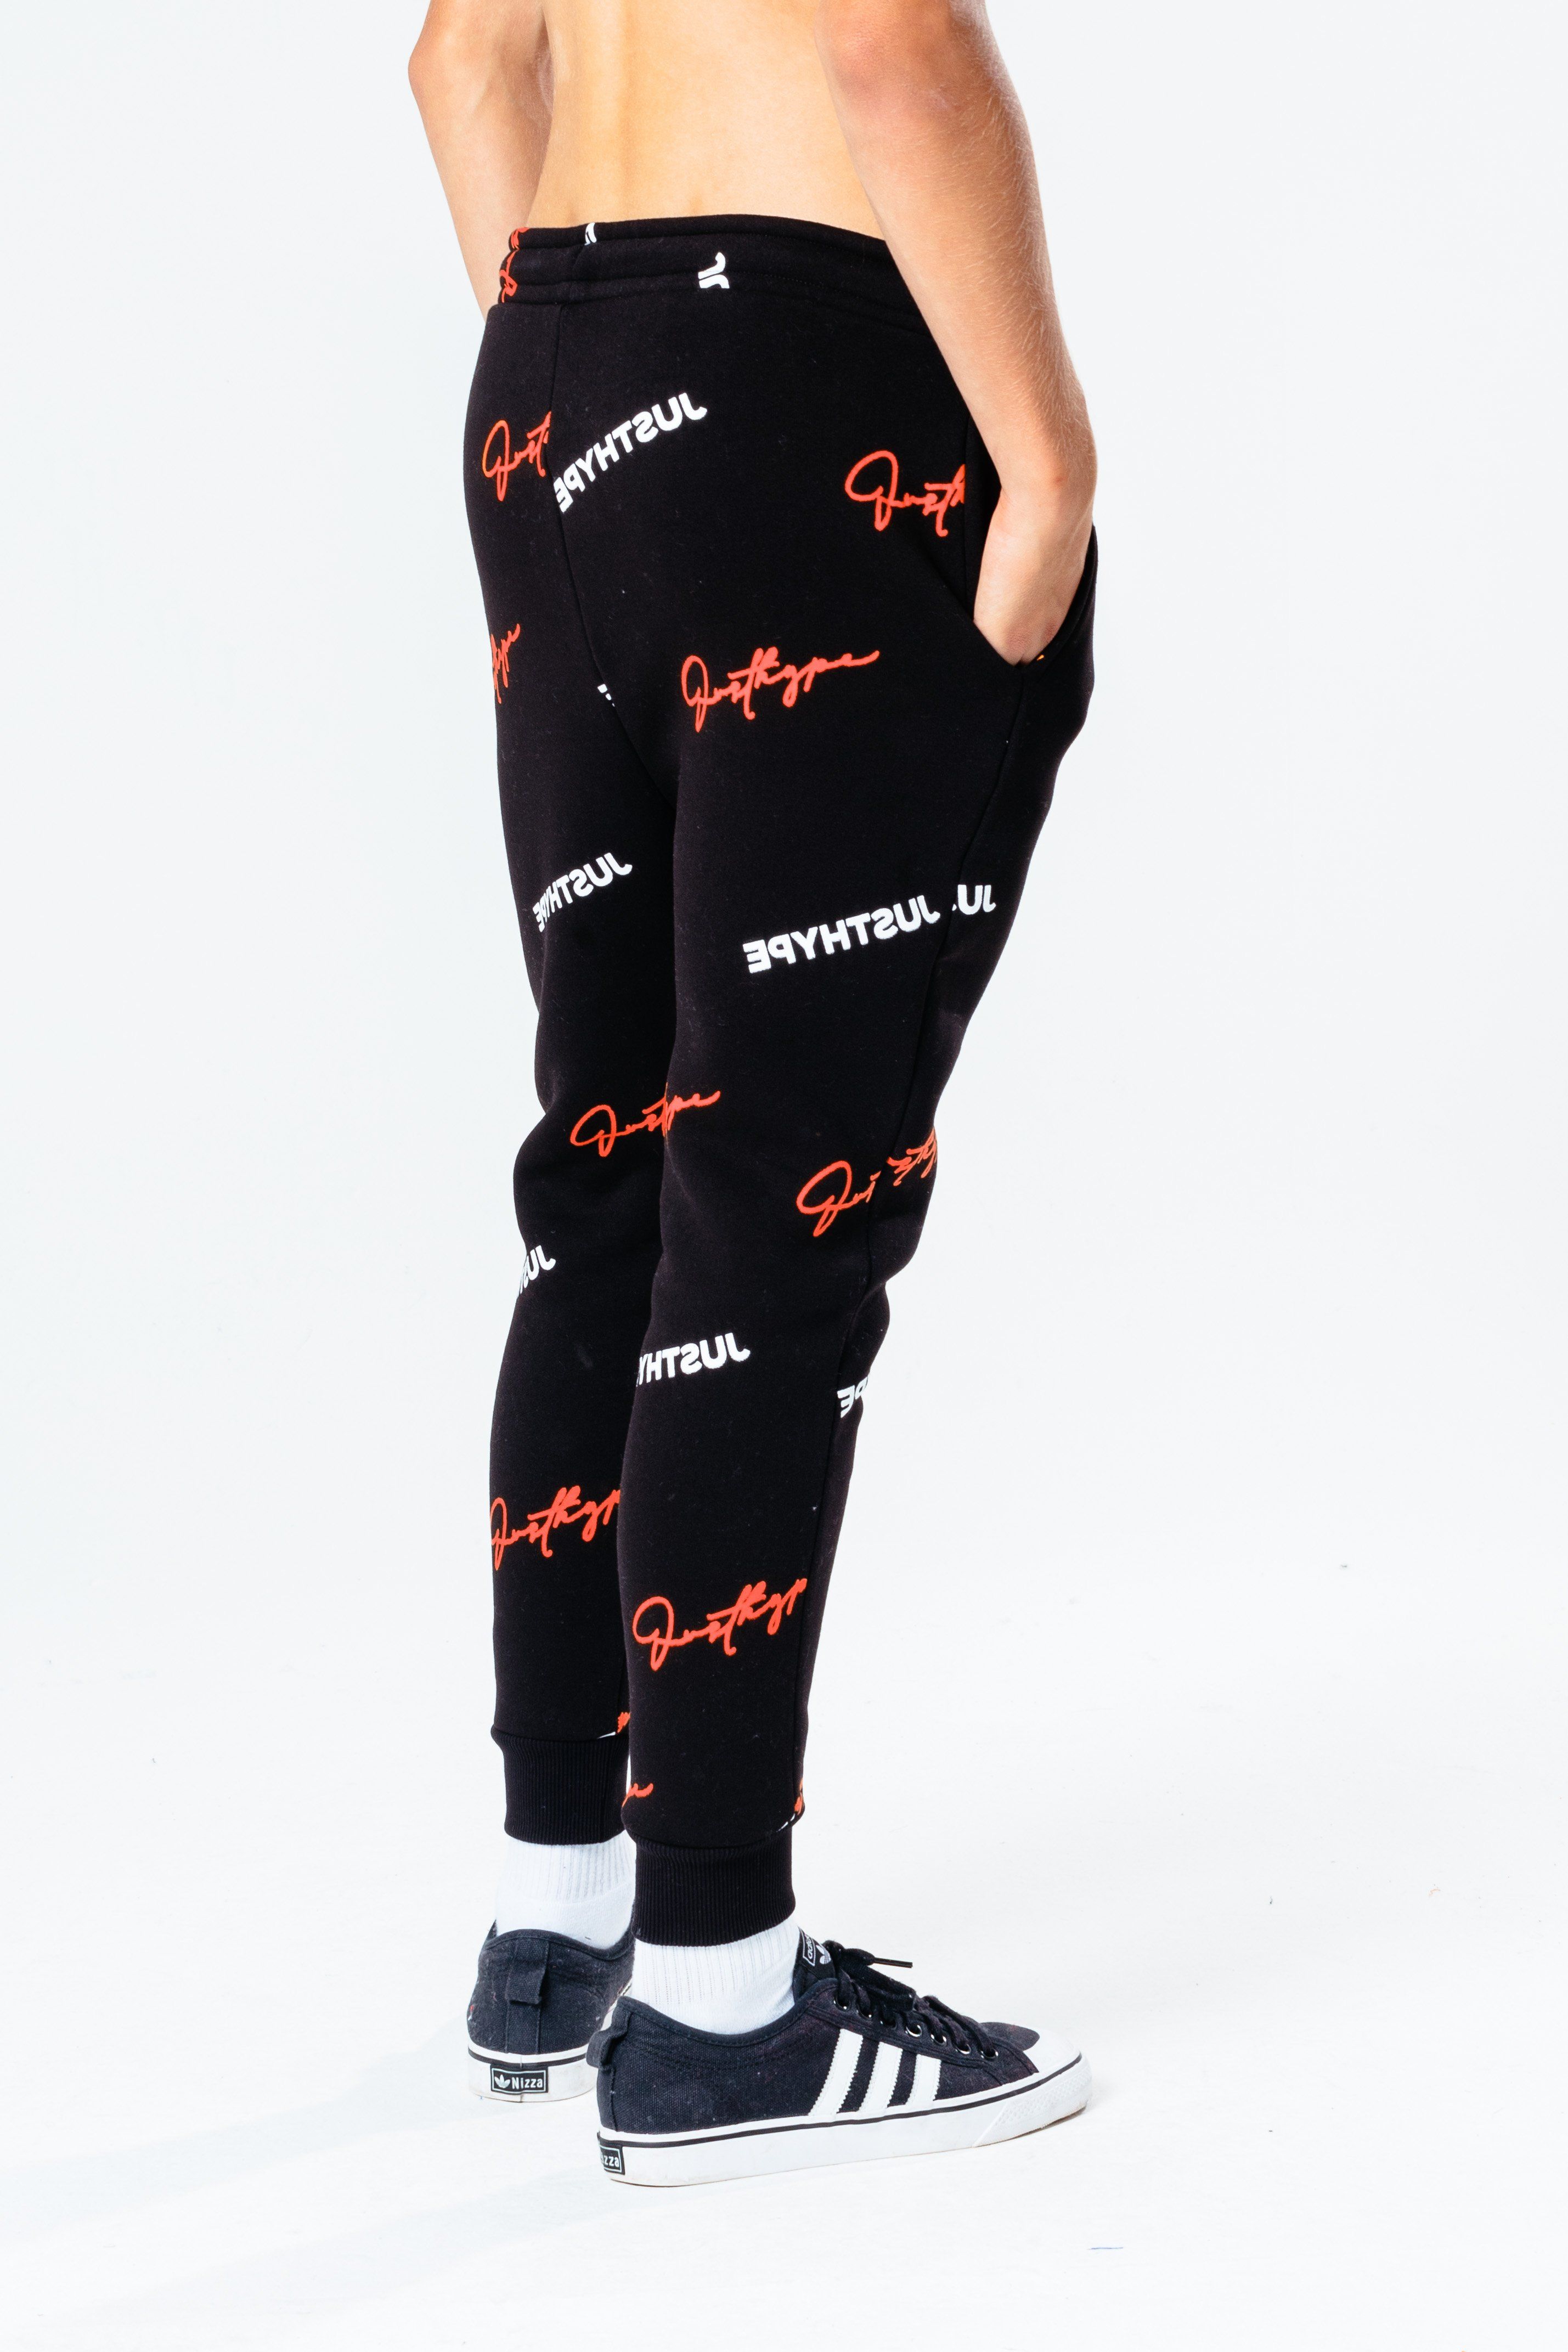 Perfect to add to your everyday jogger rotation. The HYPE. black repeat logo kids joggers feature a monochrome colour palette with a red injection. Designed in a soft-touch fabric for the ultimate comfort in our standard unisex kids jogger shape. Finished with an elasticated waistband, fitted cuffs and the iconic HYPE. script logo in a contrasting cyan. Wear with the matching hoodie to complete the look. Machine wash at 30 degrees.